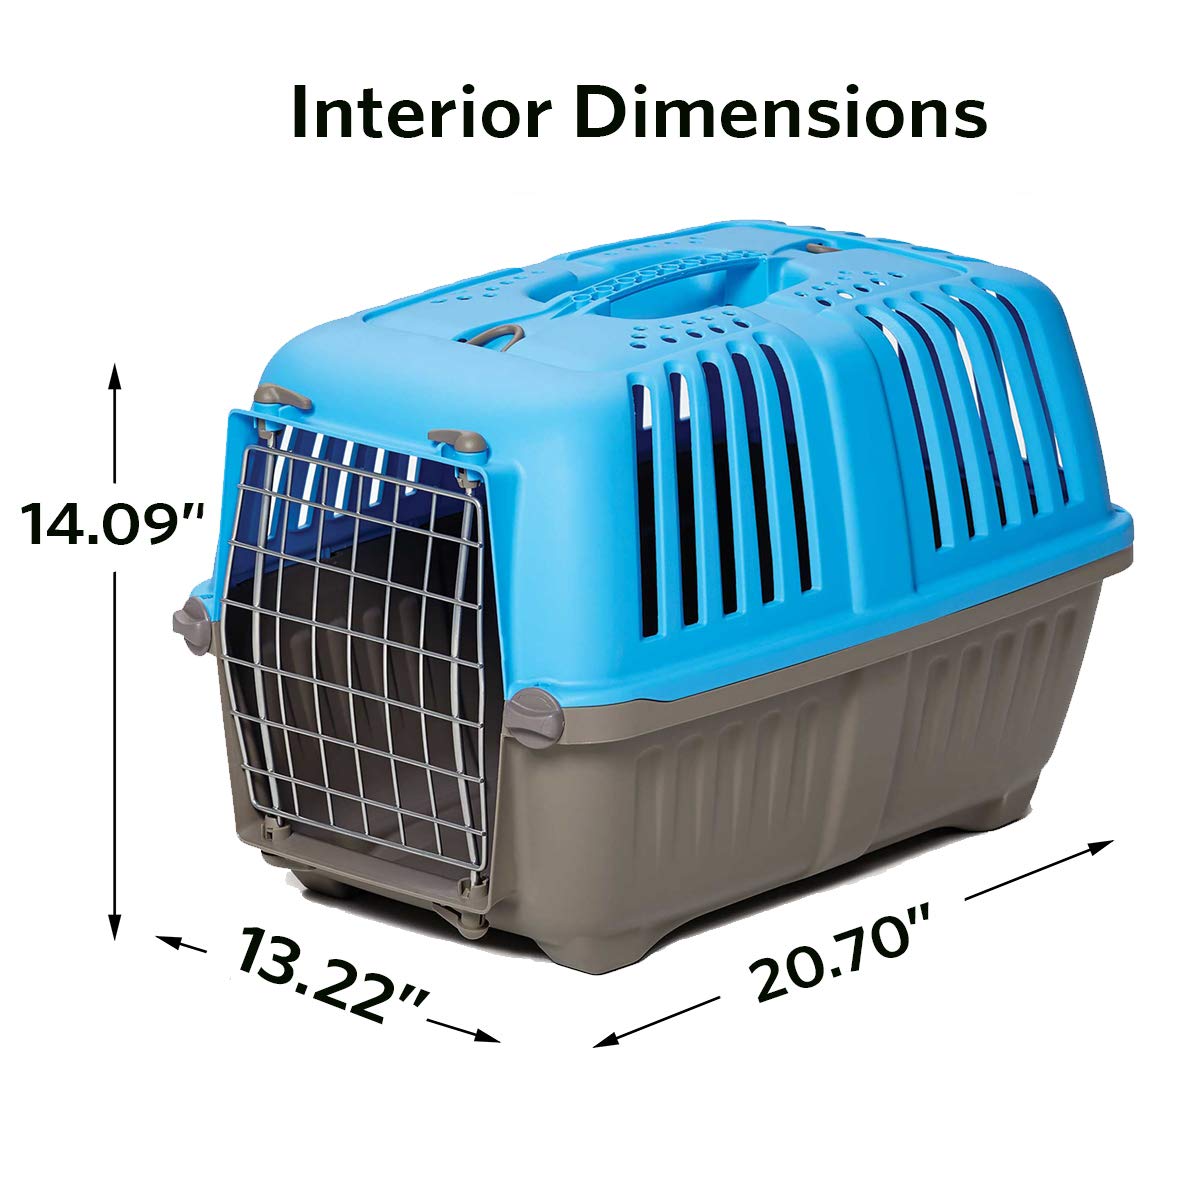 Midwest Spree Hard-Sided Travel Cat and Dog Kennel Carrier - Blue - 22" X 14" X 14" Inches  